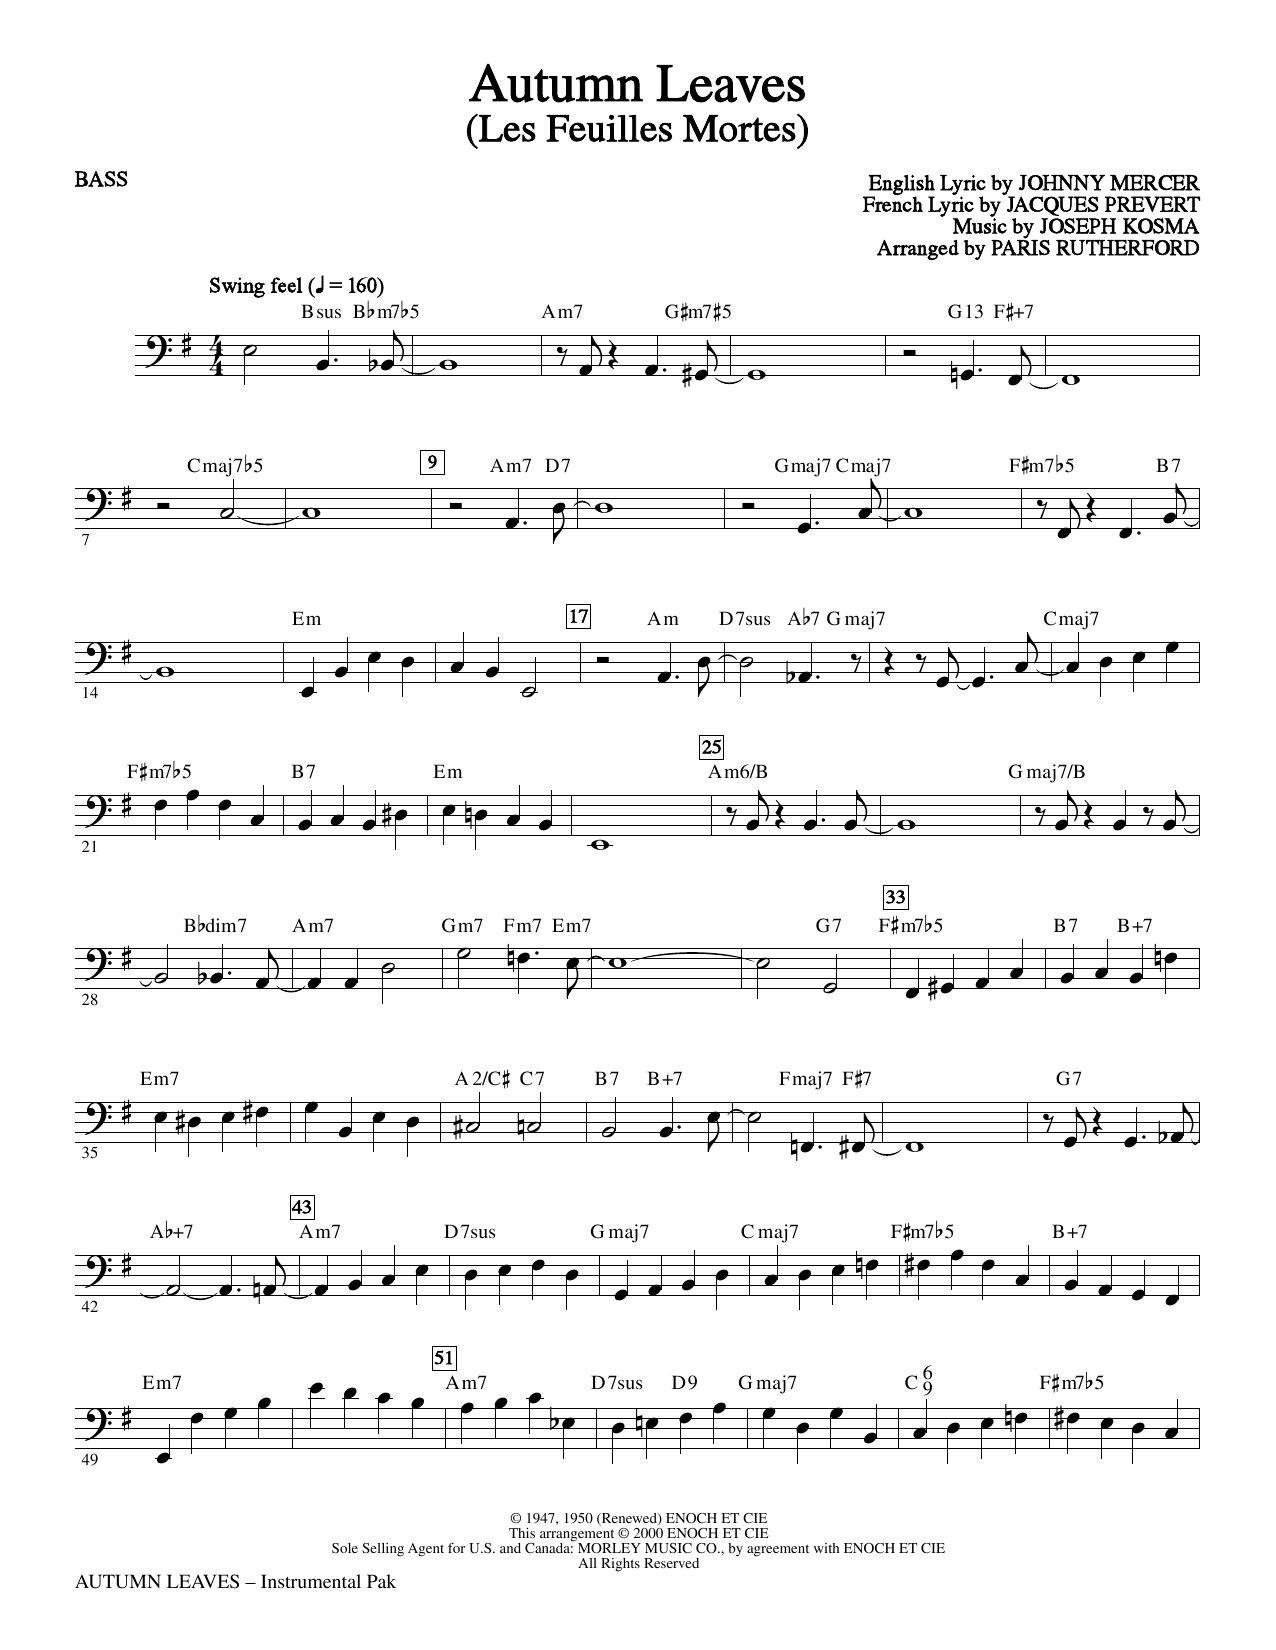 Download Paris Rutherford Autumn Leaves - Bass Sheet Music